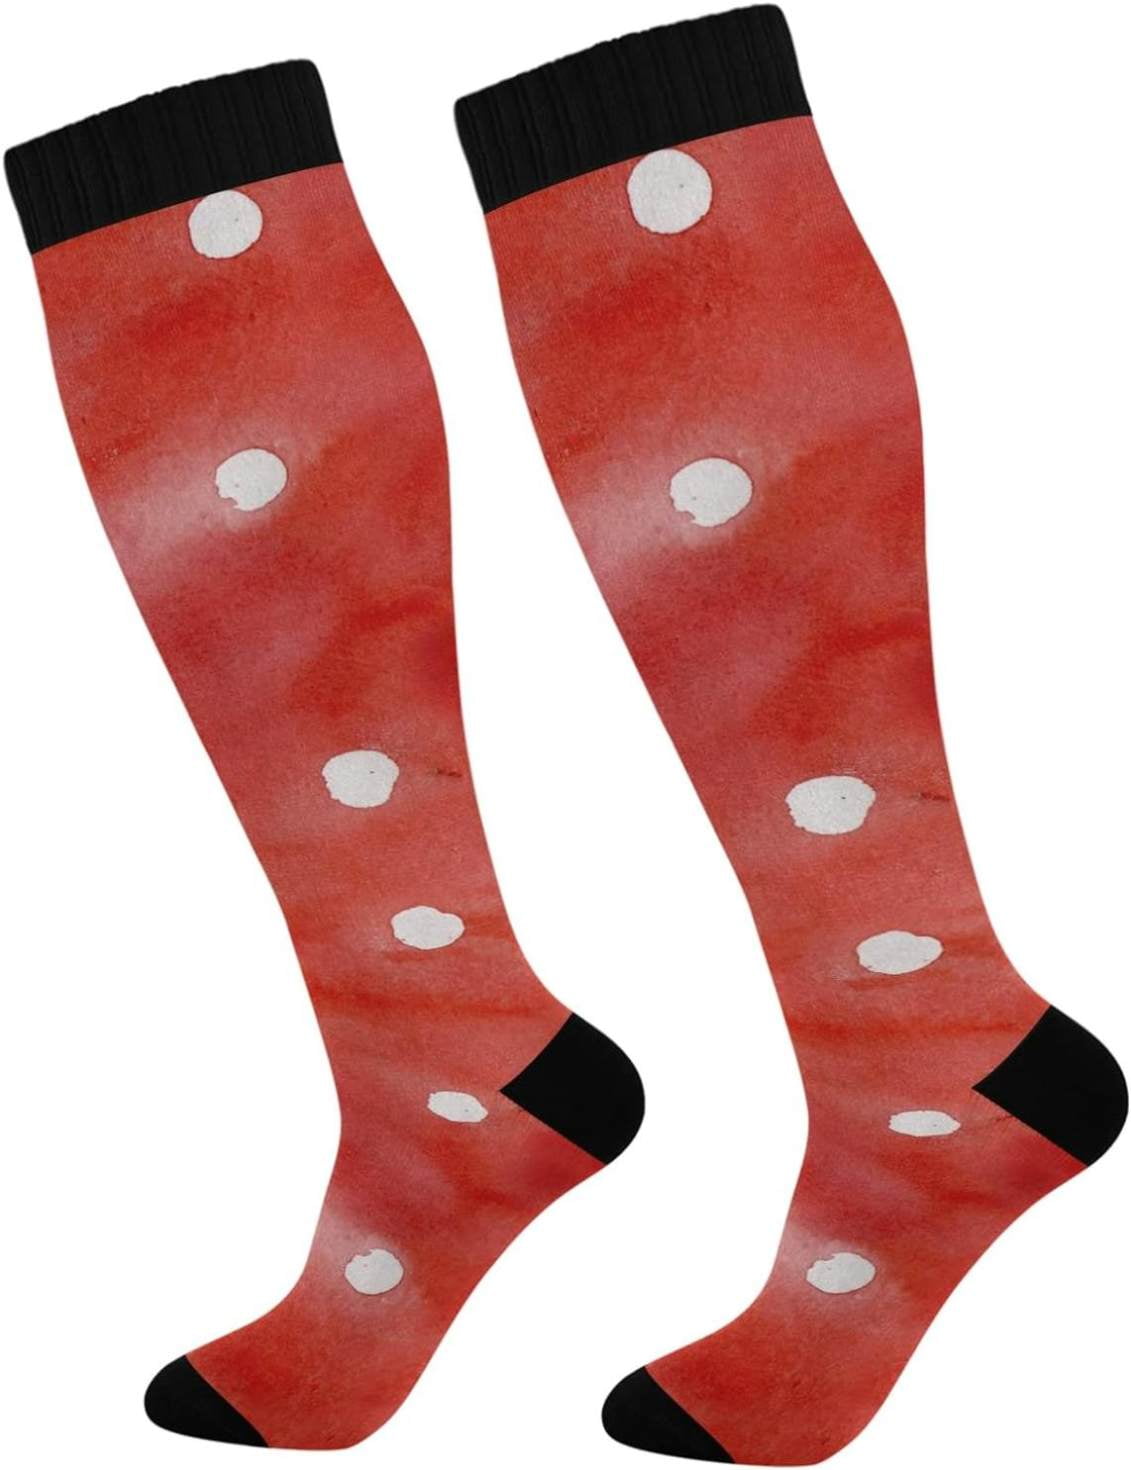 Women's tights with dots black 15 DEN Trippy